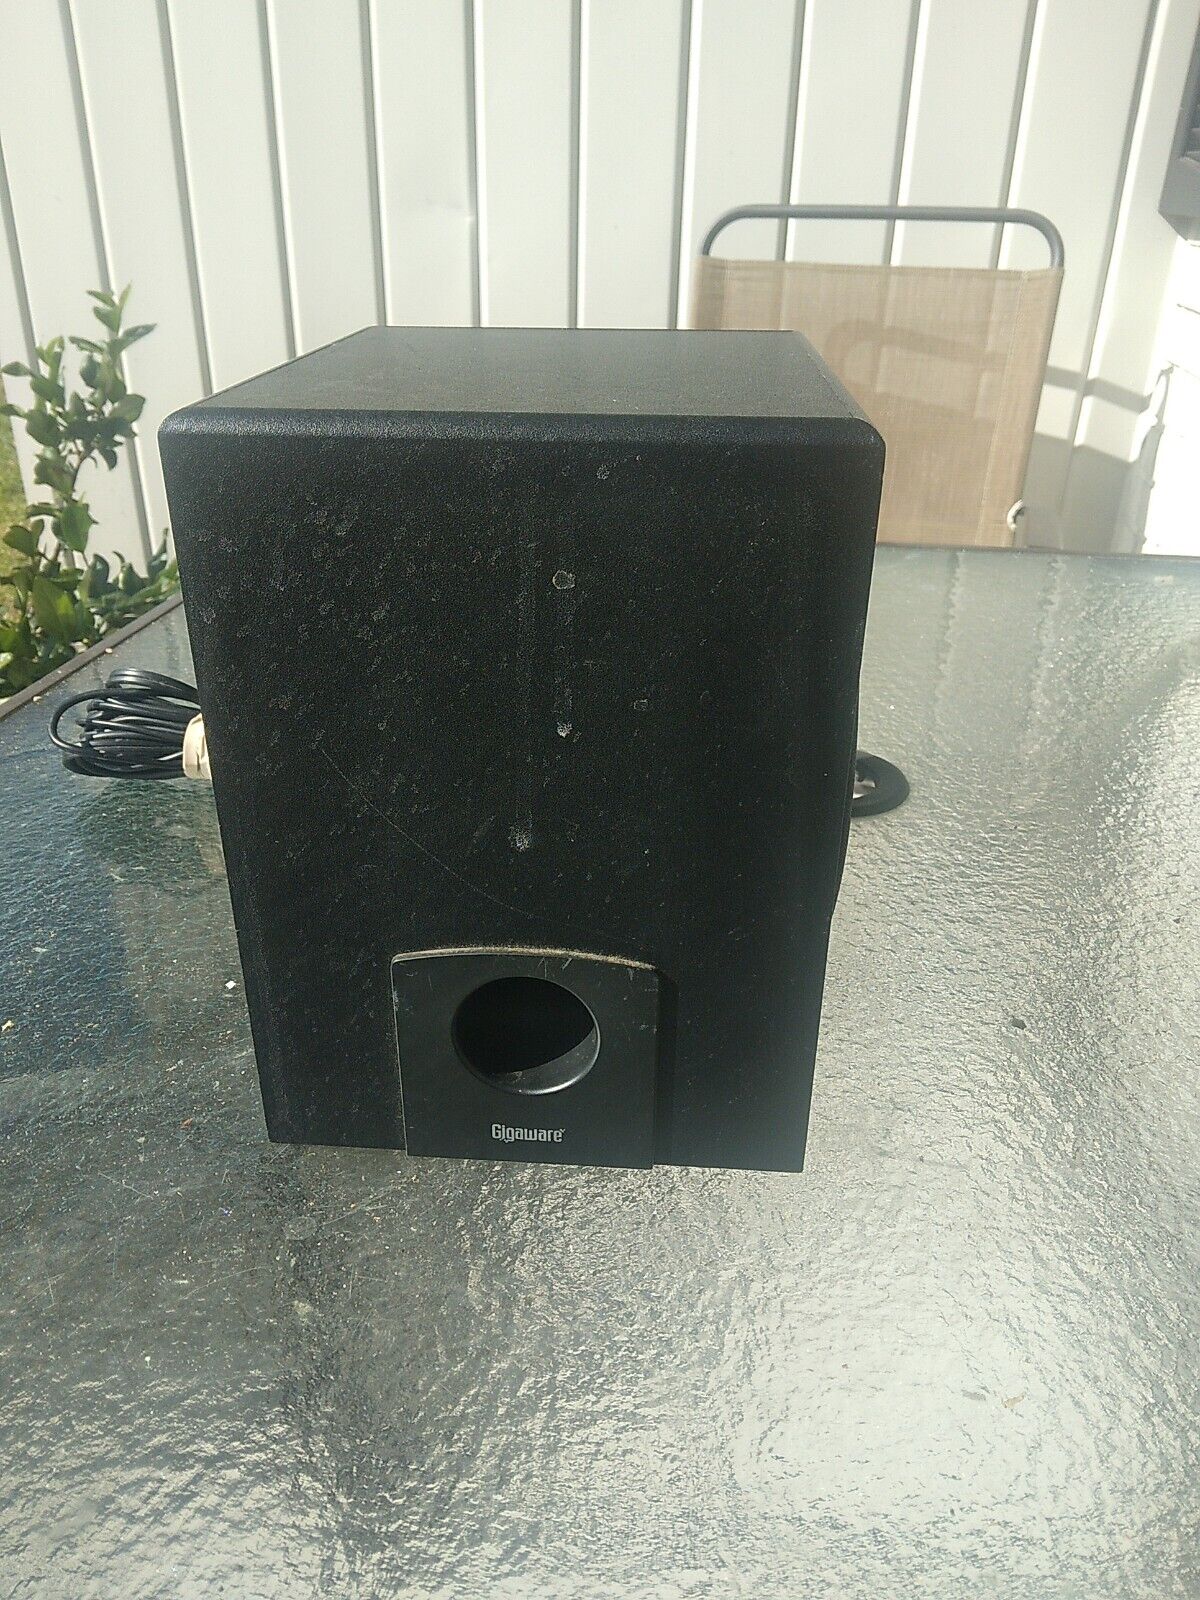 Gigaware 40-287 2.1 Multimedia Computer Speakers- SUBWOOFER ONLY TESTED WORKING